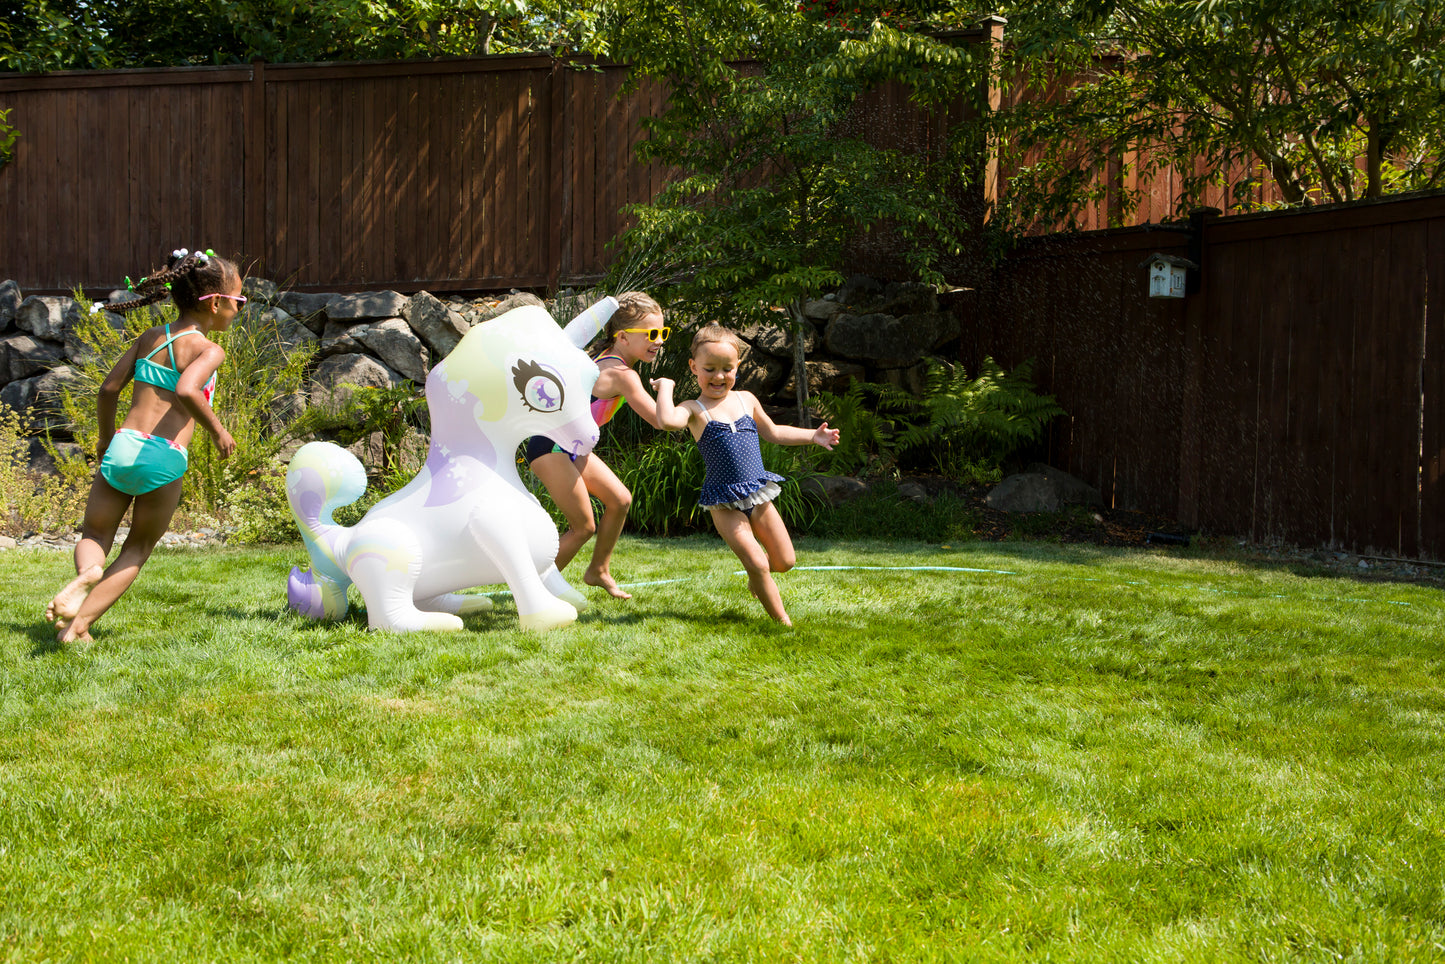 Children playing with inflatable unicorn Mist-Ical Uni Sprinkler